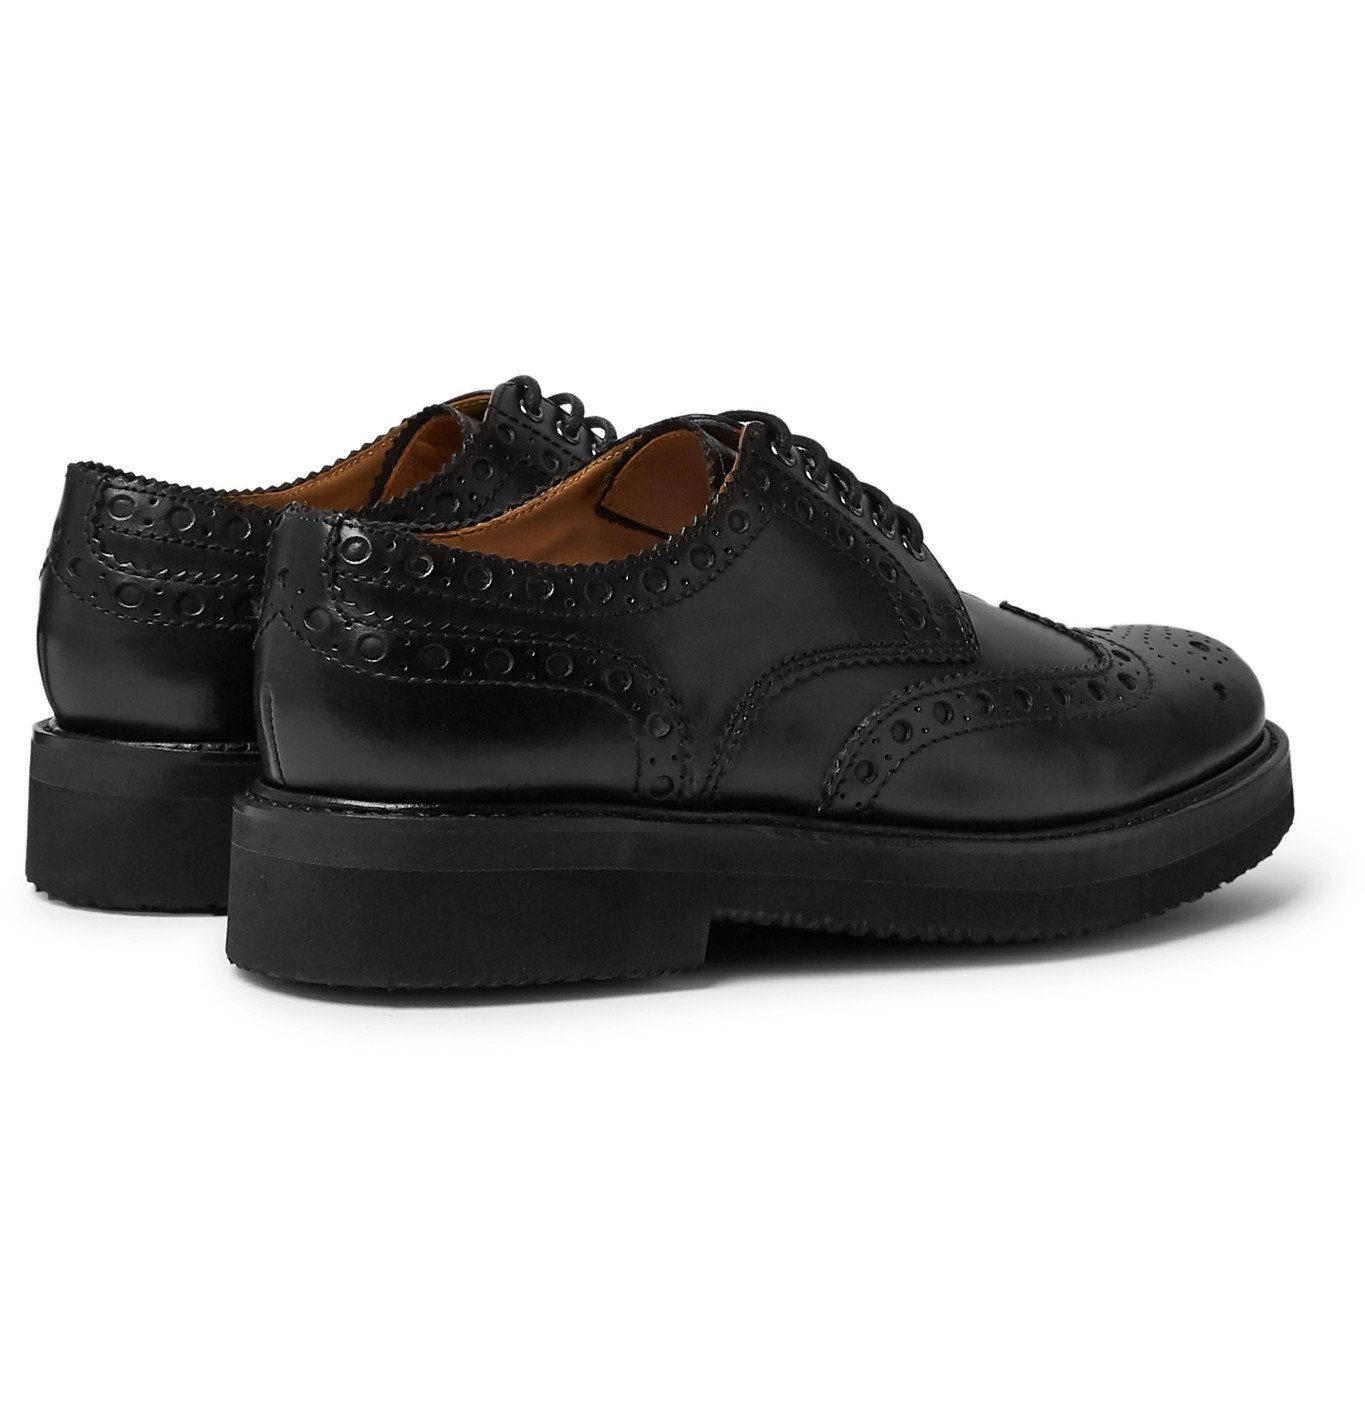 Grenson - Archie Leather Wingtip Brogues - Black Grenson